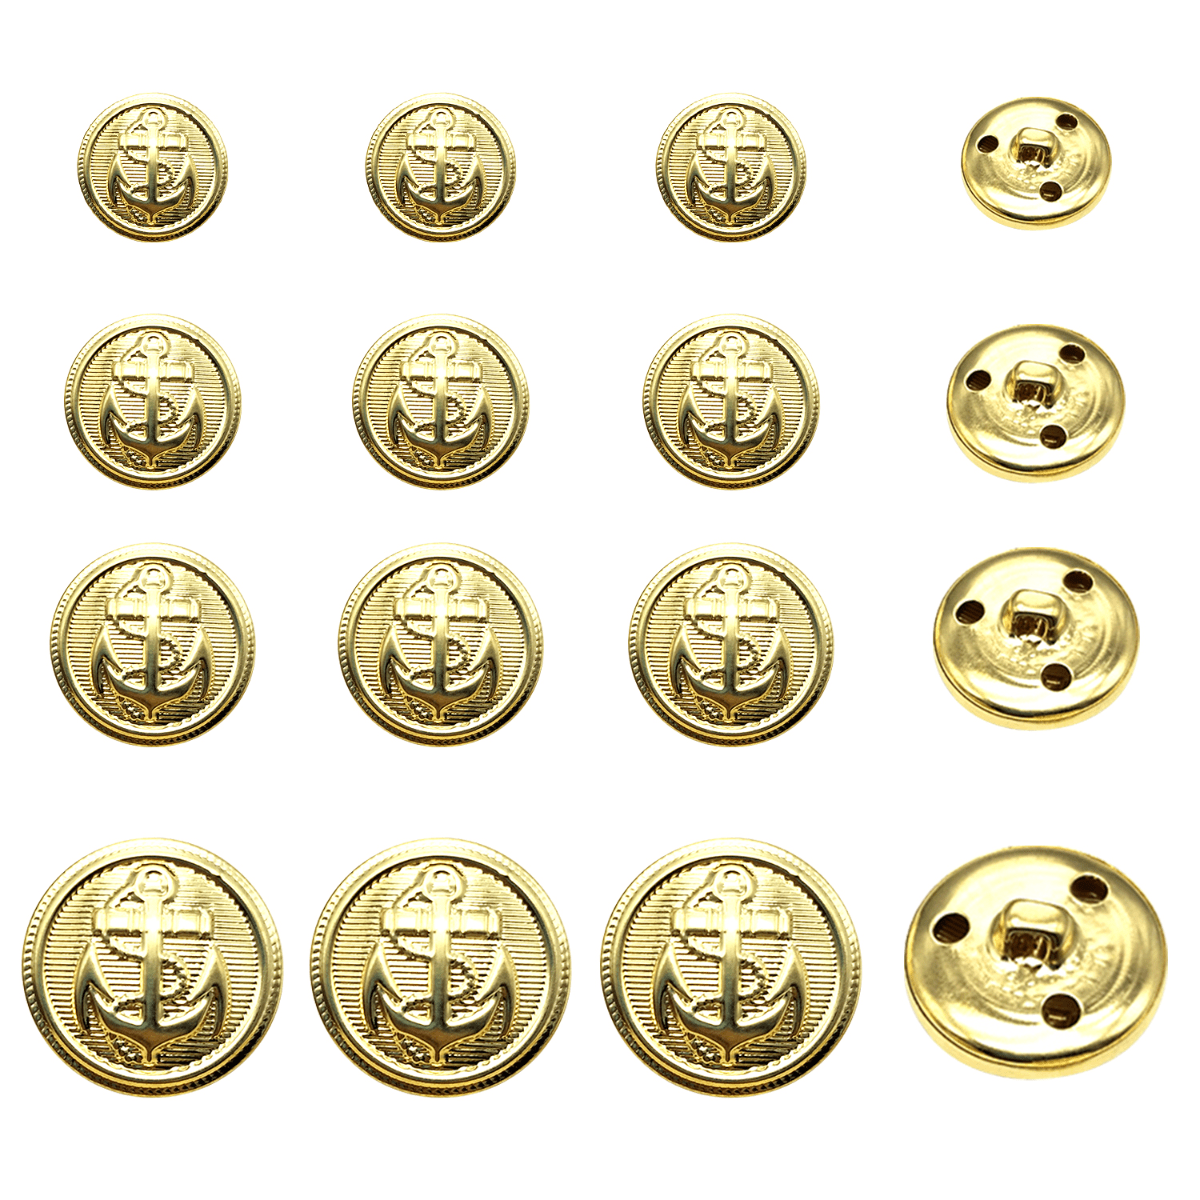 Replacement Blazer Buttons, Alloy Clothing Accessories